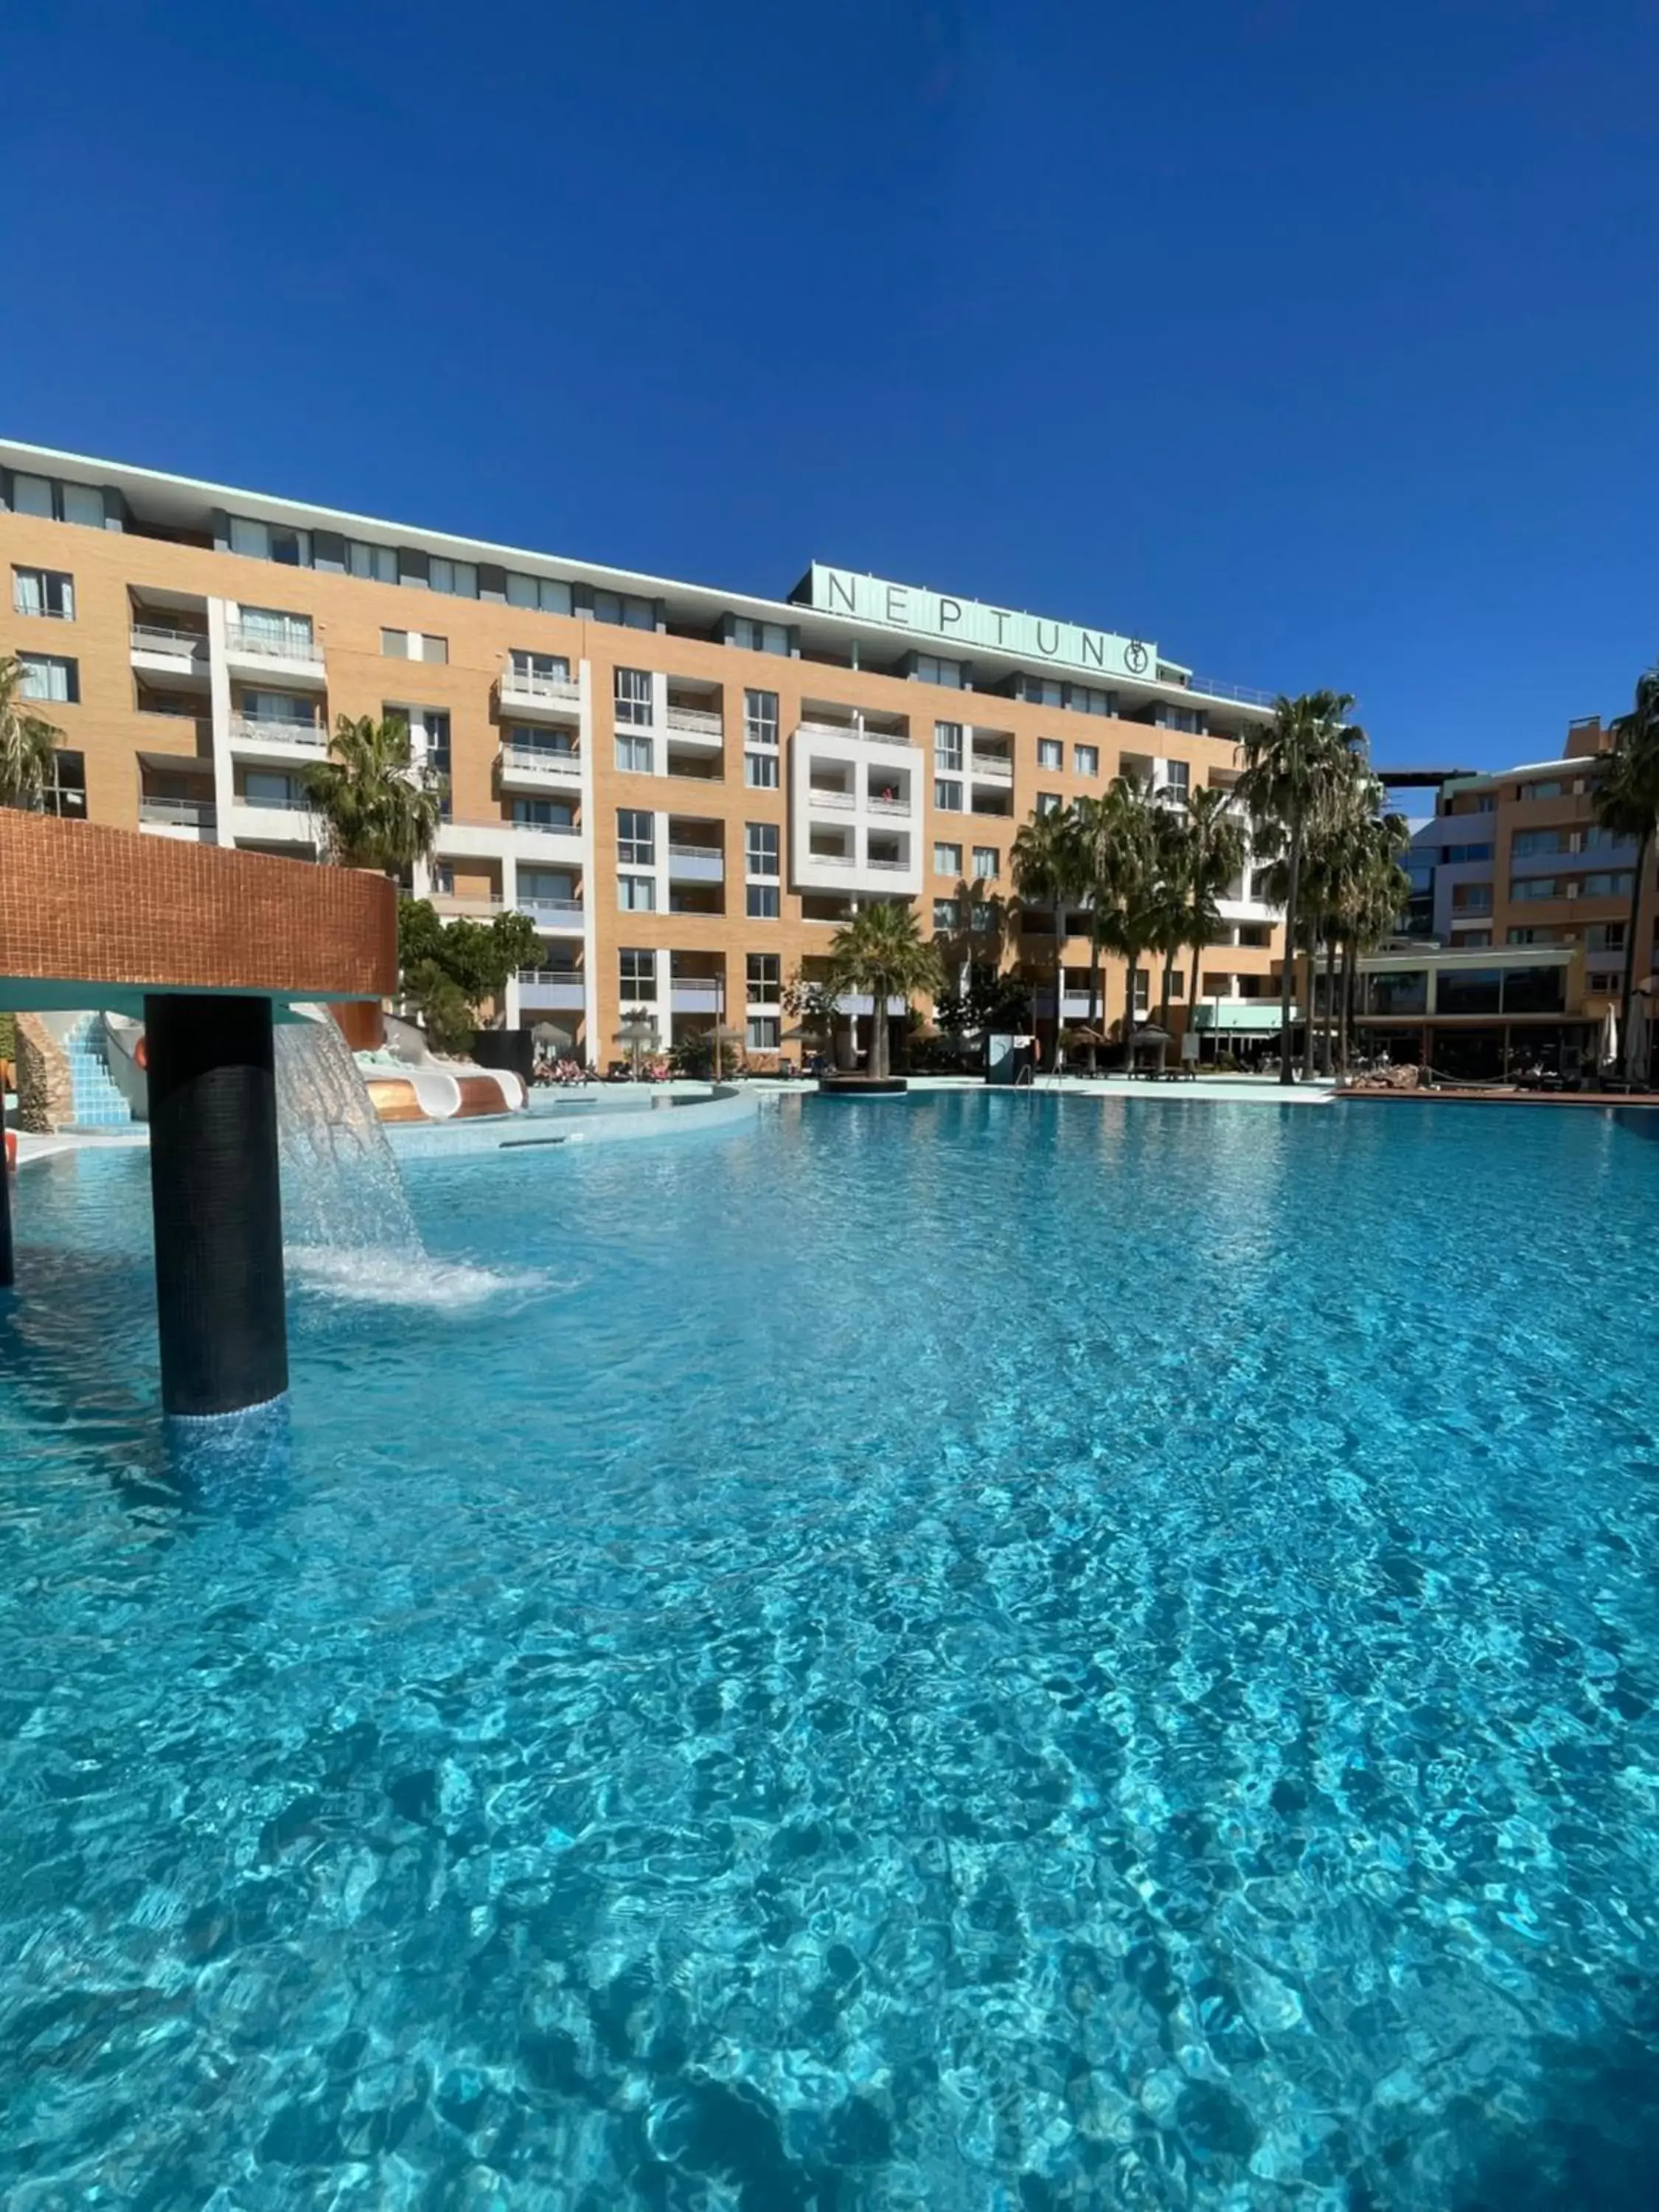 Swimming pool, Property Building in Hotel Neptuno by ON GROUP